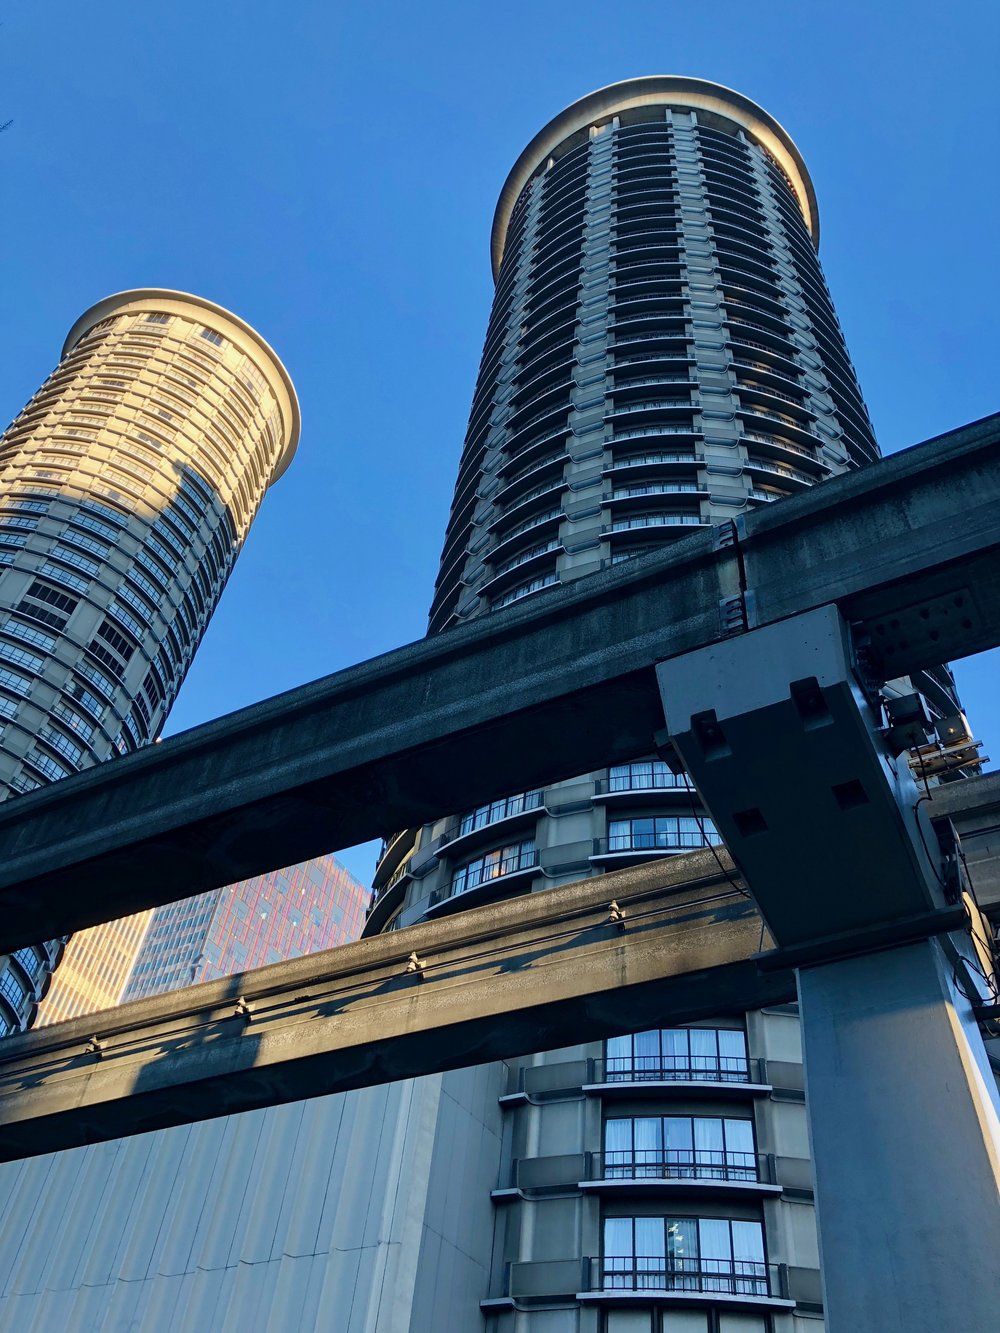 Monorail and Highrises - iPhone X